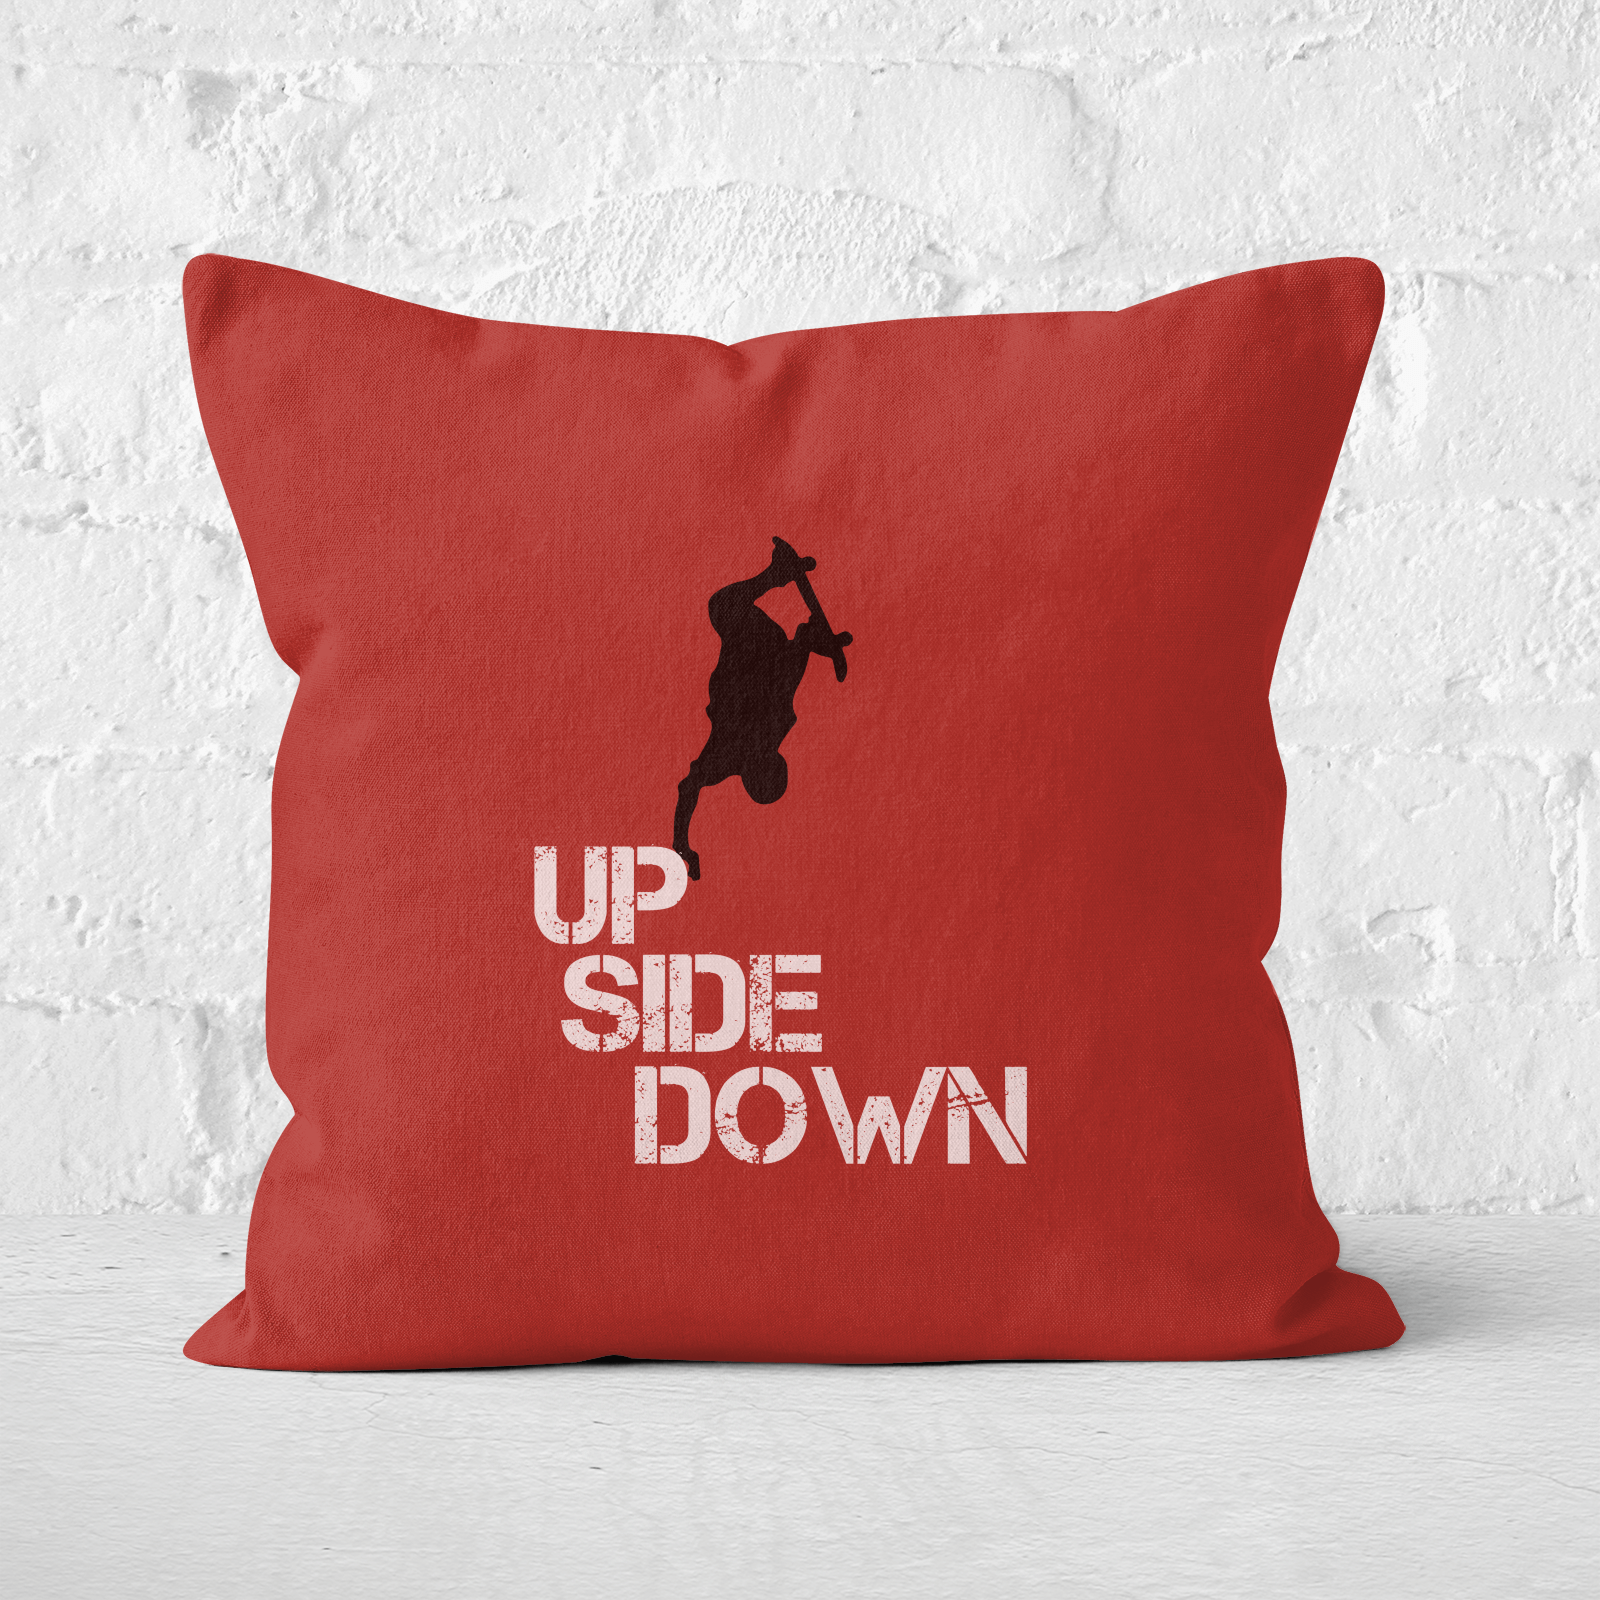 Up Side Down Square Cushion - 60x60cm - Soft Touch